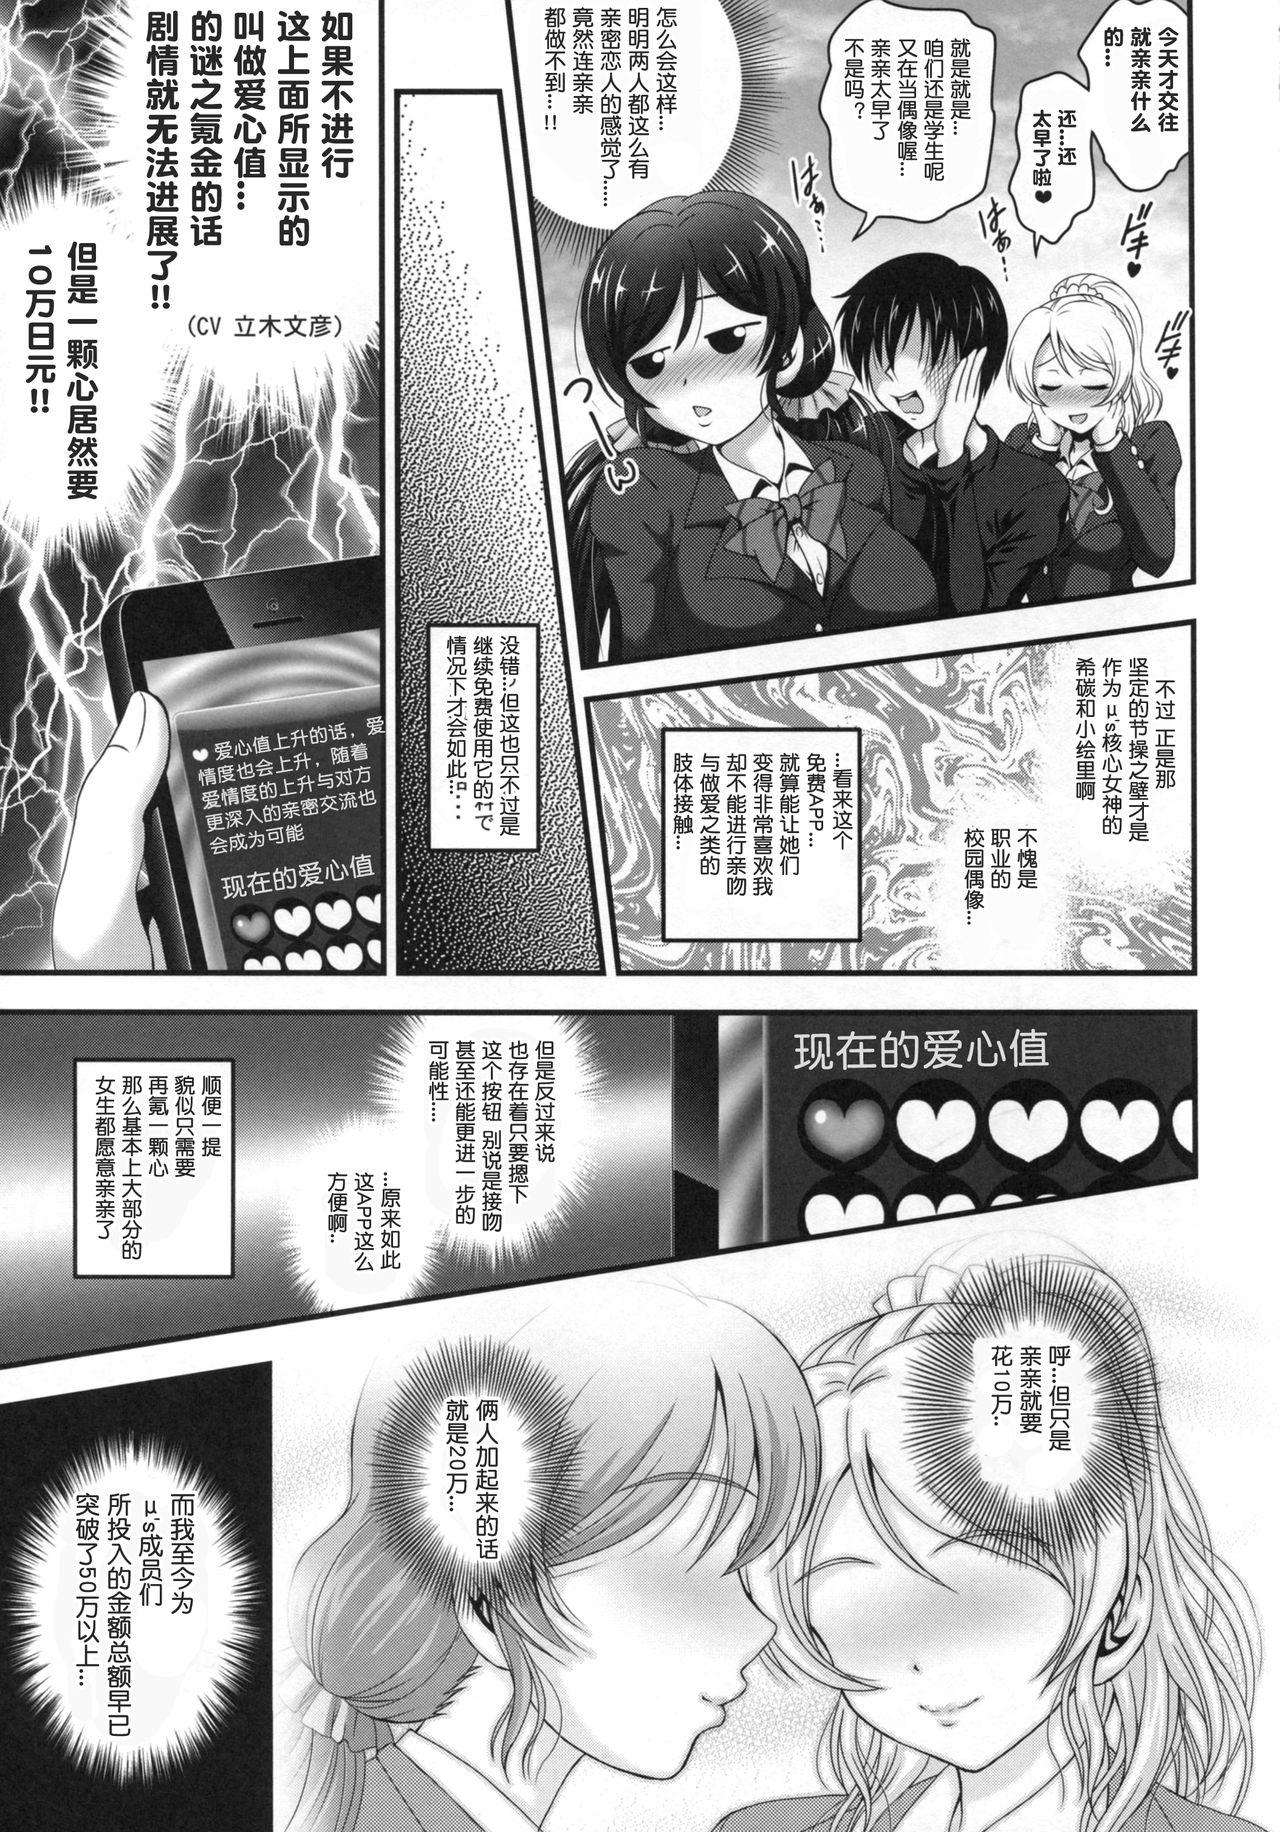 Exotic Ore Yome Saimin 1 - Love live Pay - Page 7